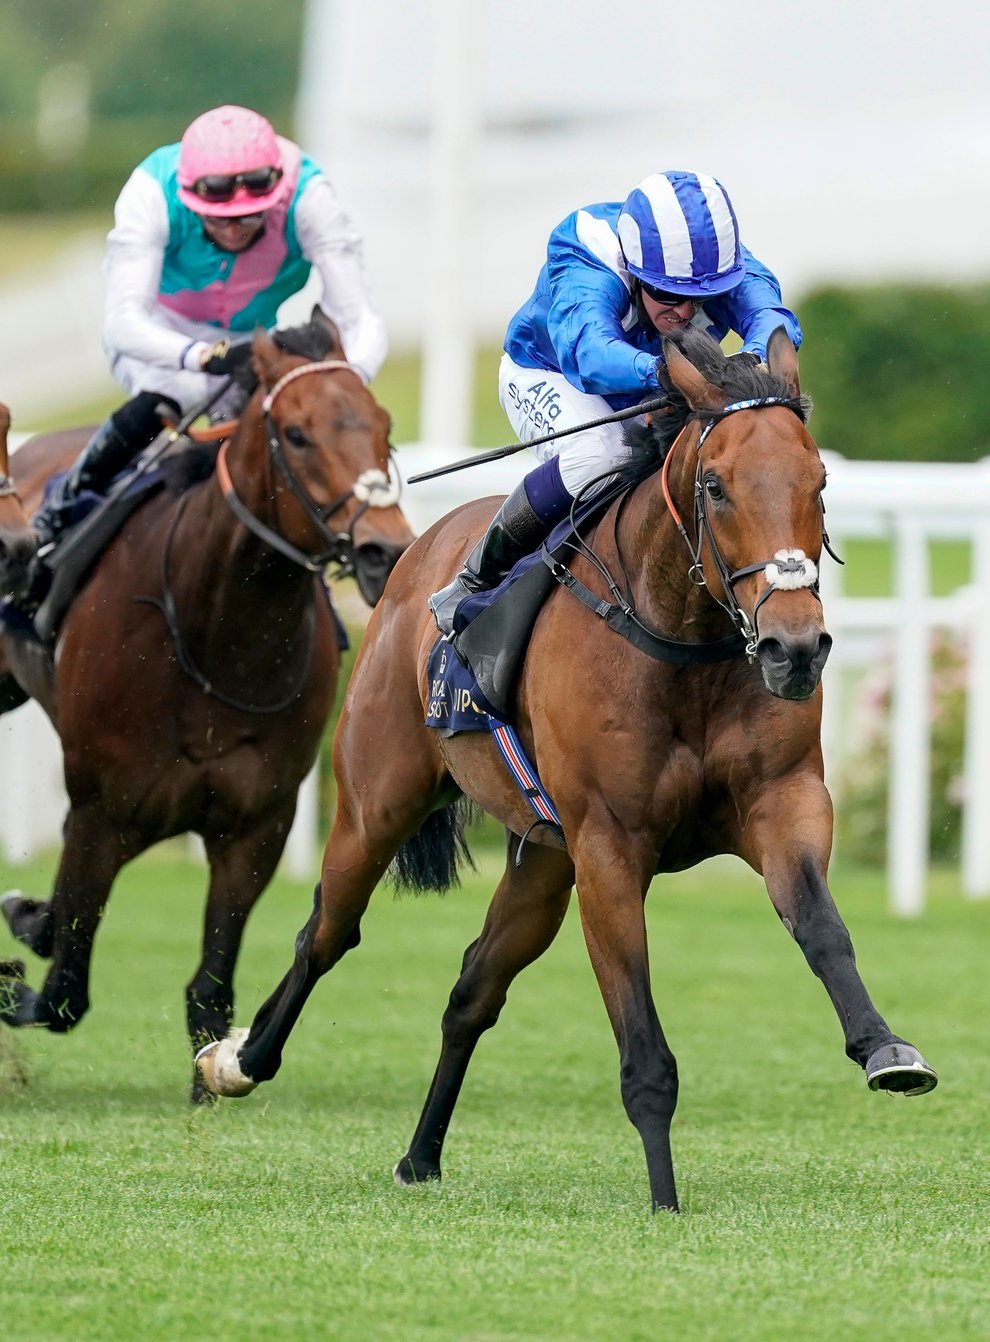 Battaash (right) strides to victory in the King’s Stand Stakes at Royal Ascot in 2020